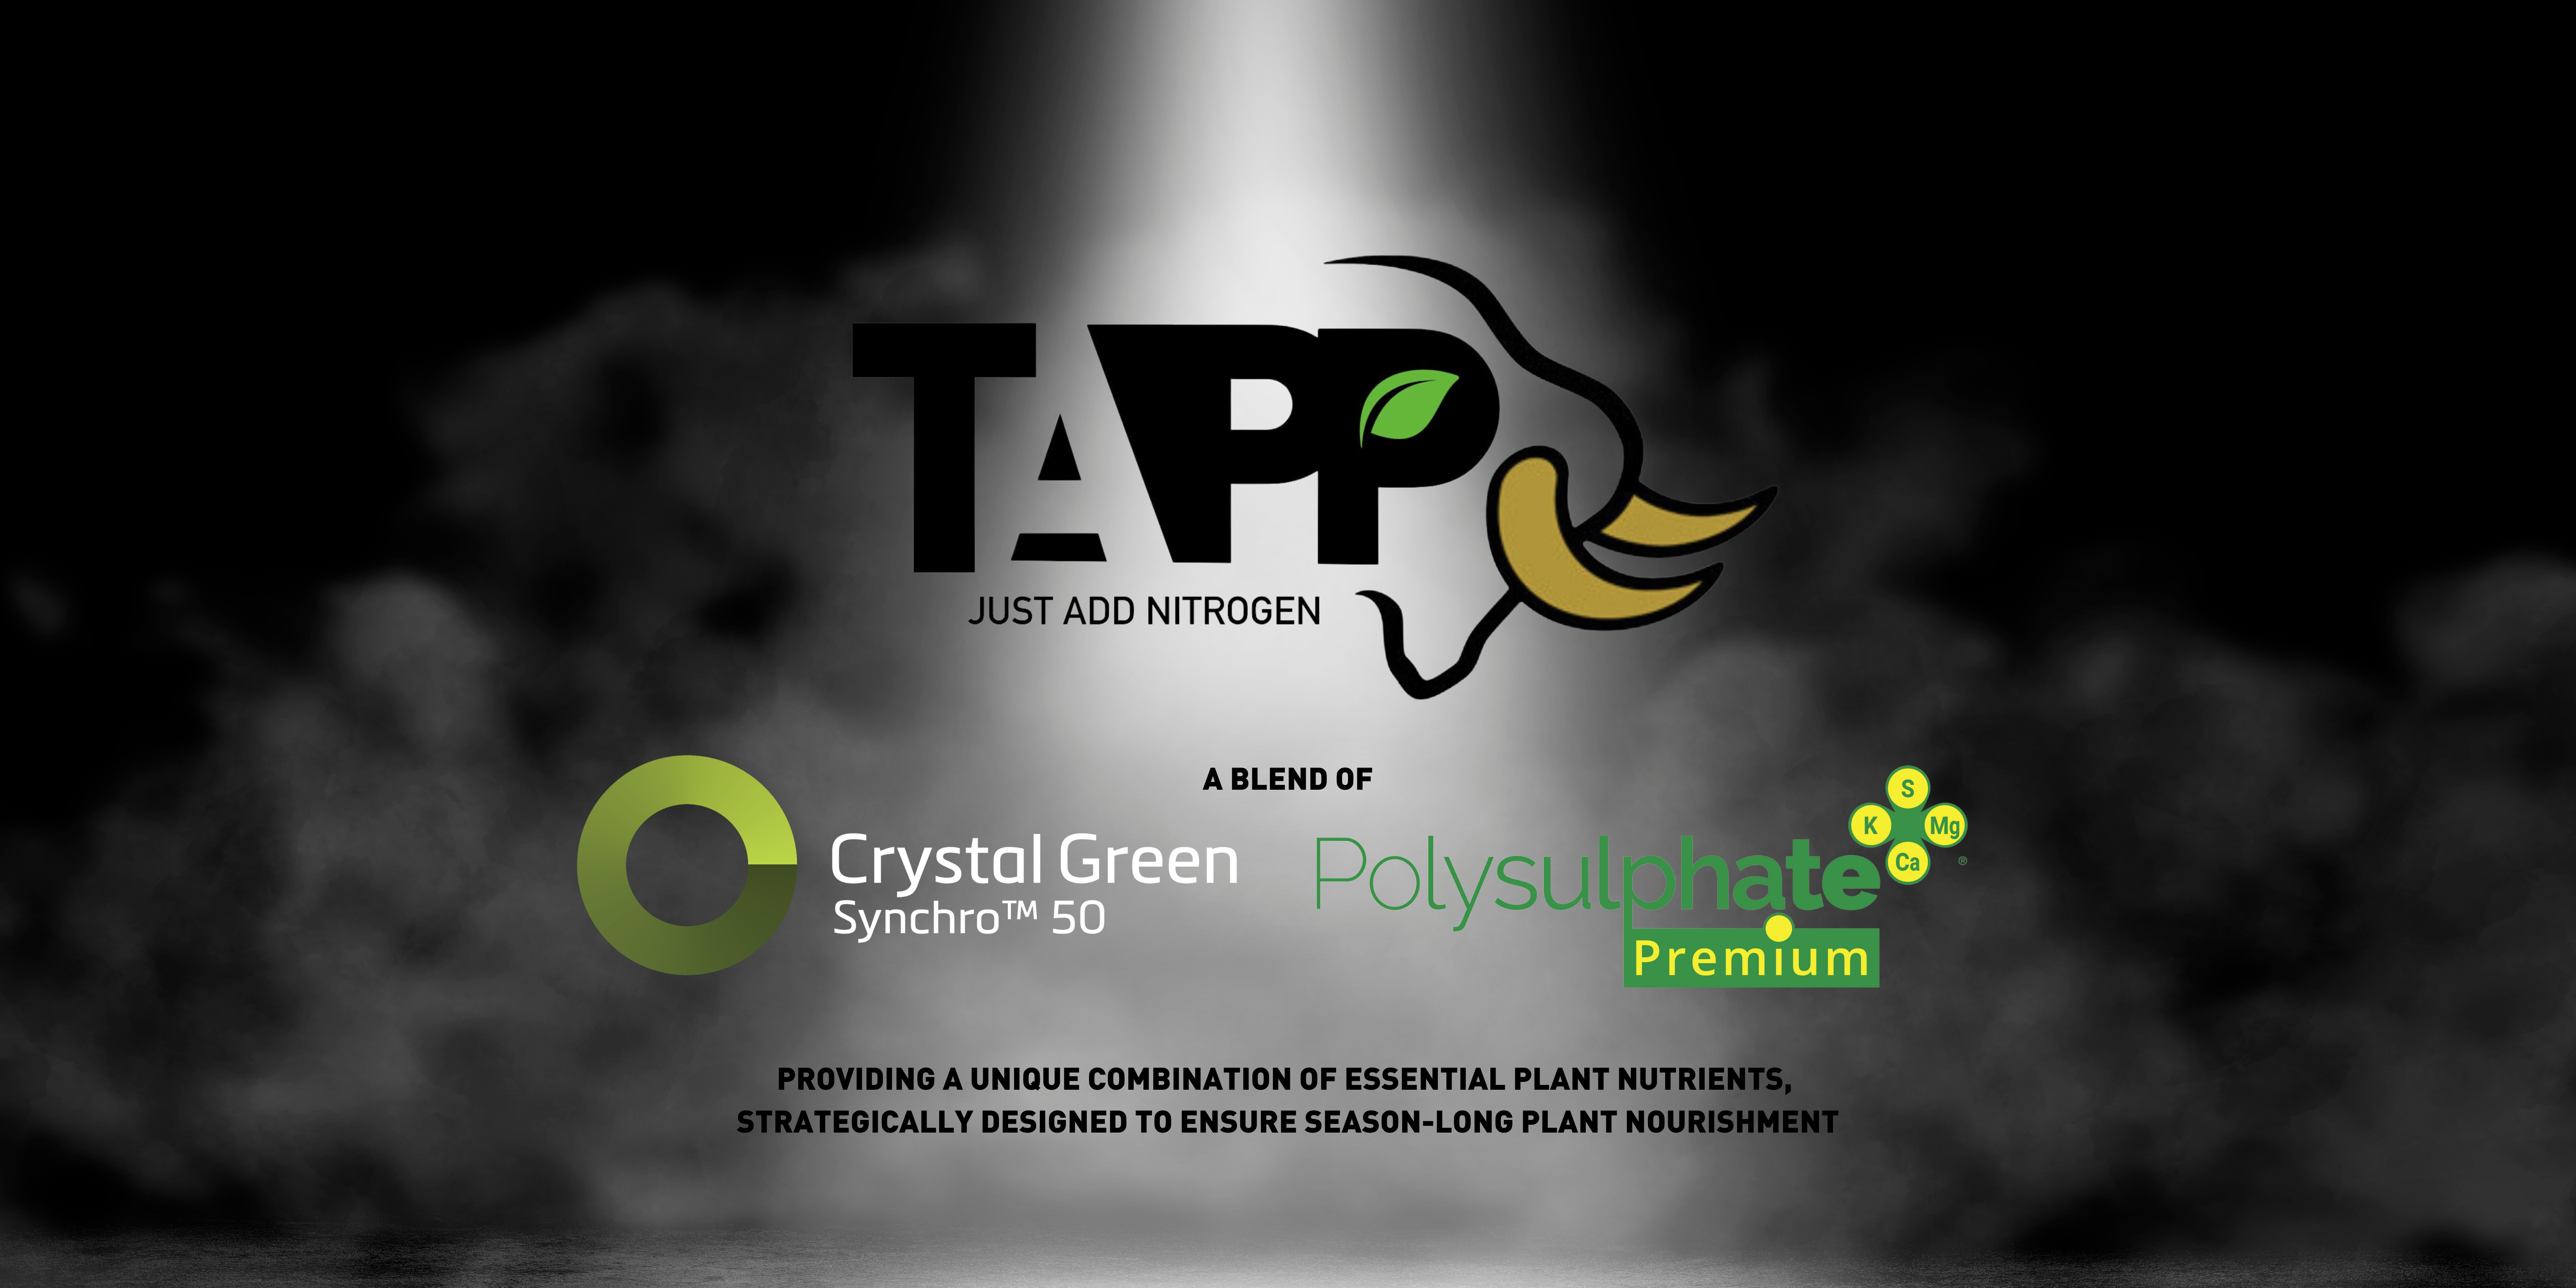 Tapp logo with crystal green synchro logo and polysulphate